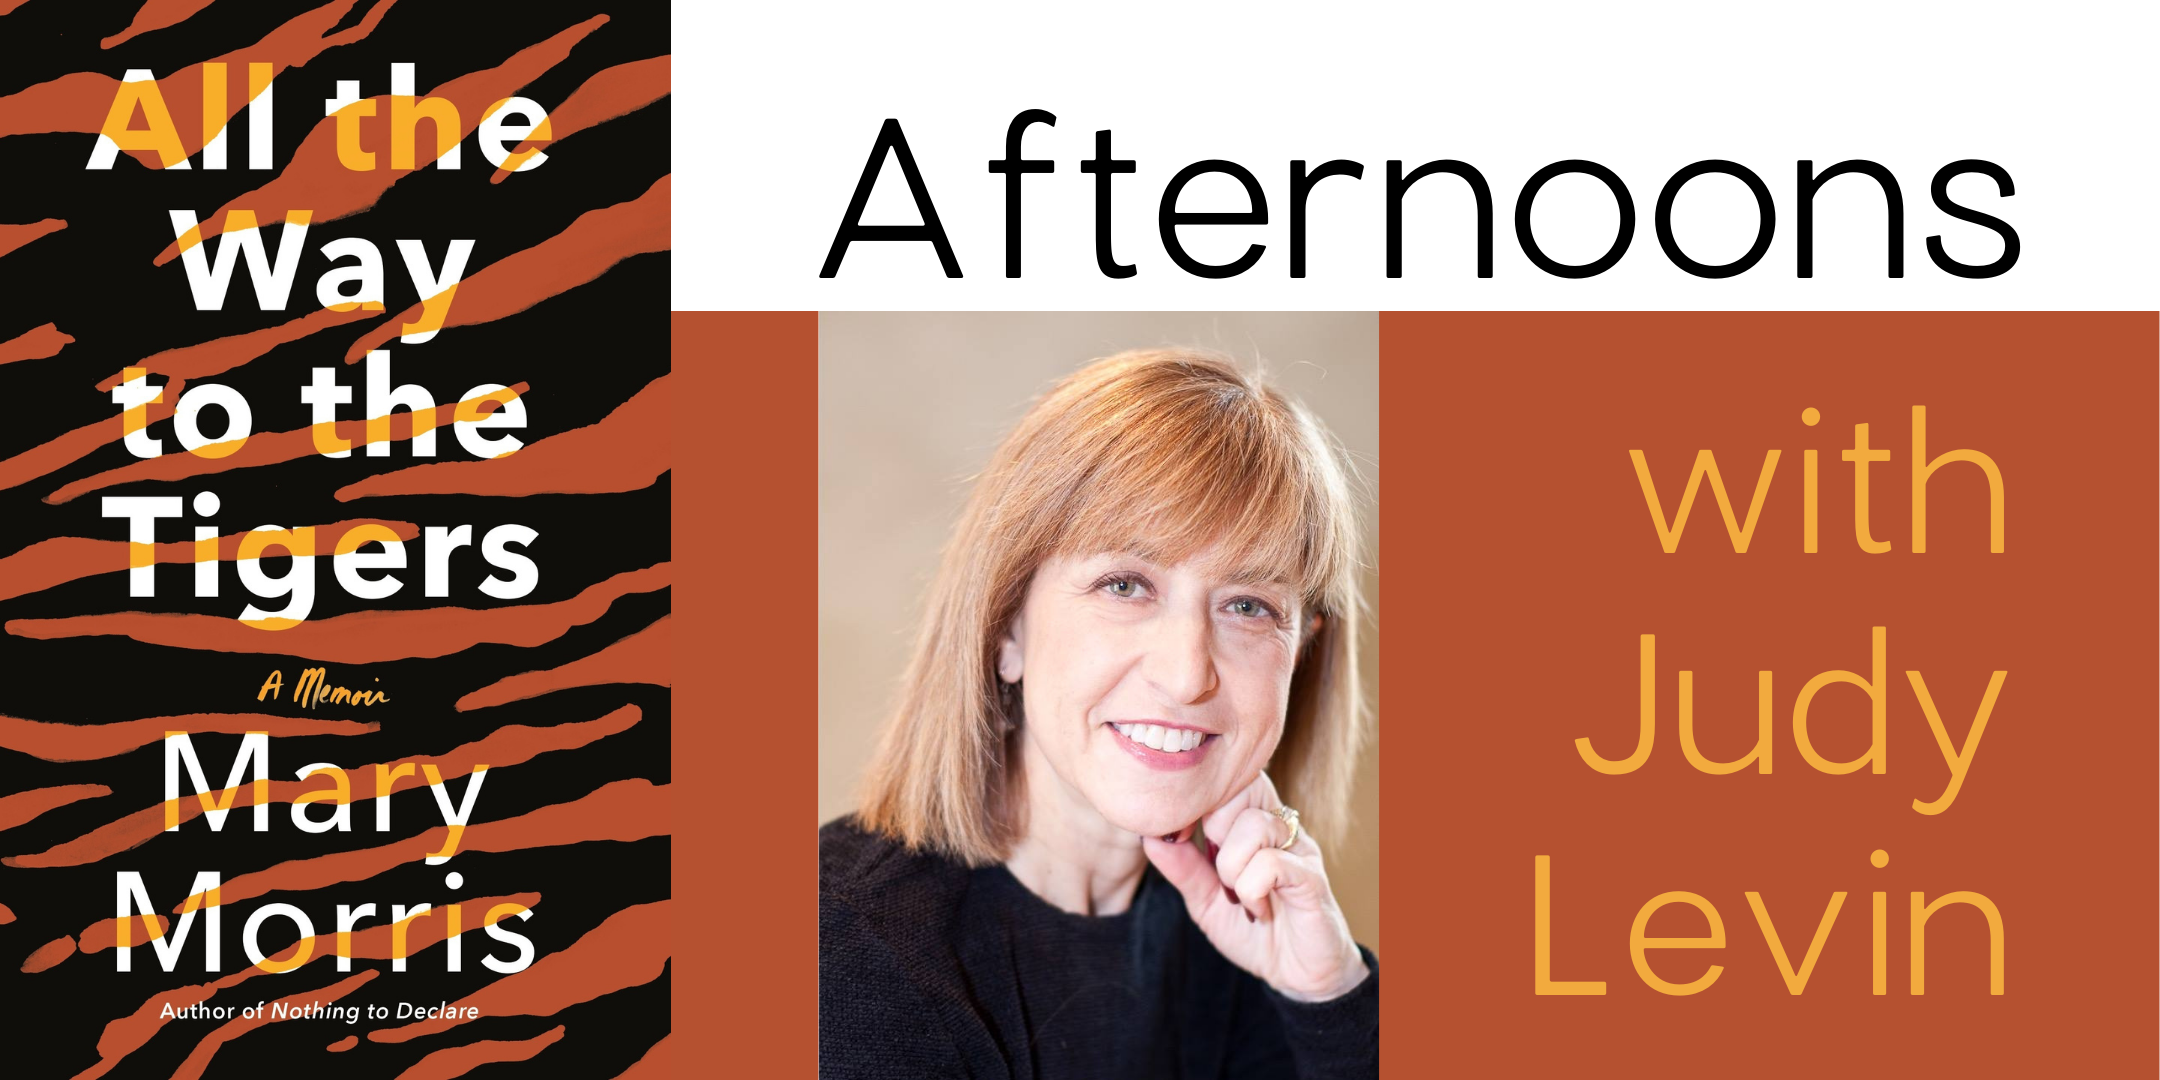 image of "Afternoons with Judy Levin: All the Way to the Tigers""